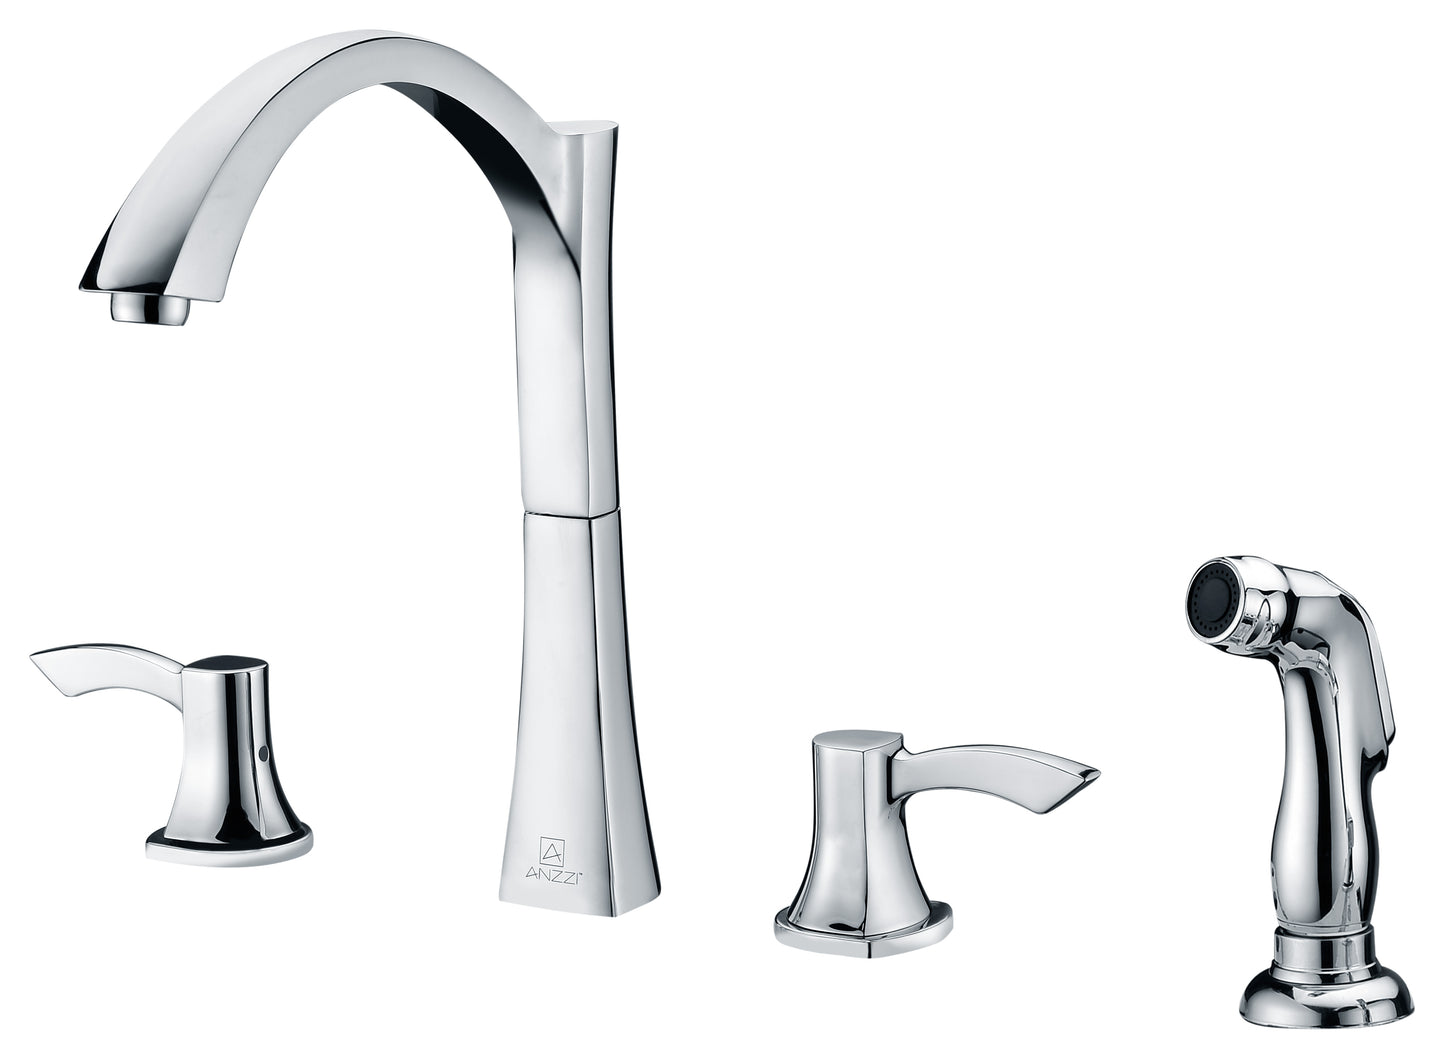 KF-AZ032 - Soave Series 2-Handle Standard Kitchen Faucet in Polished Chrome